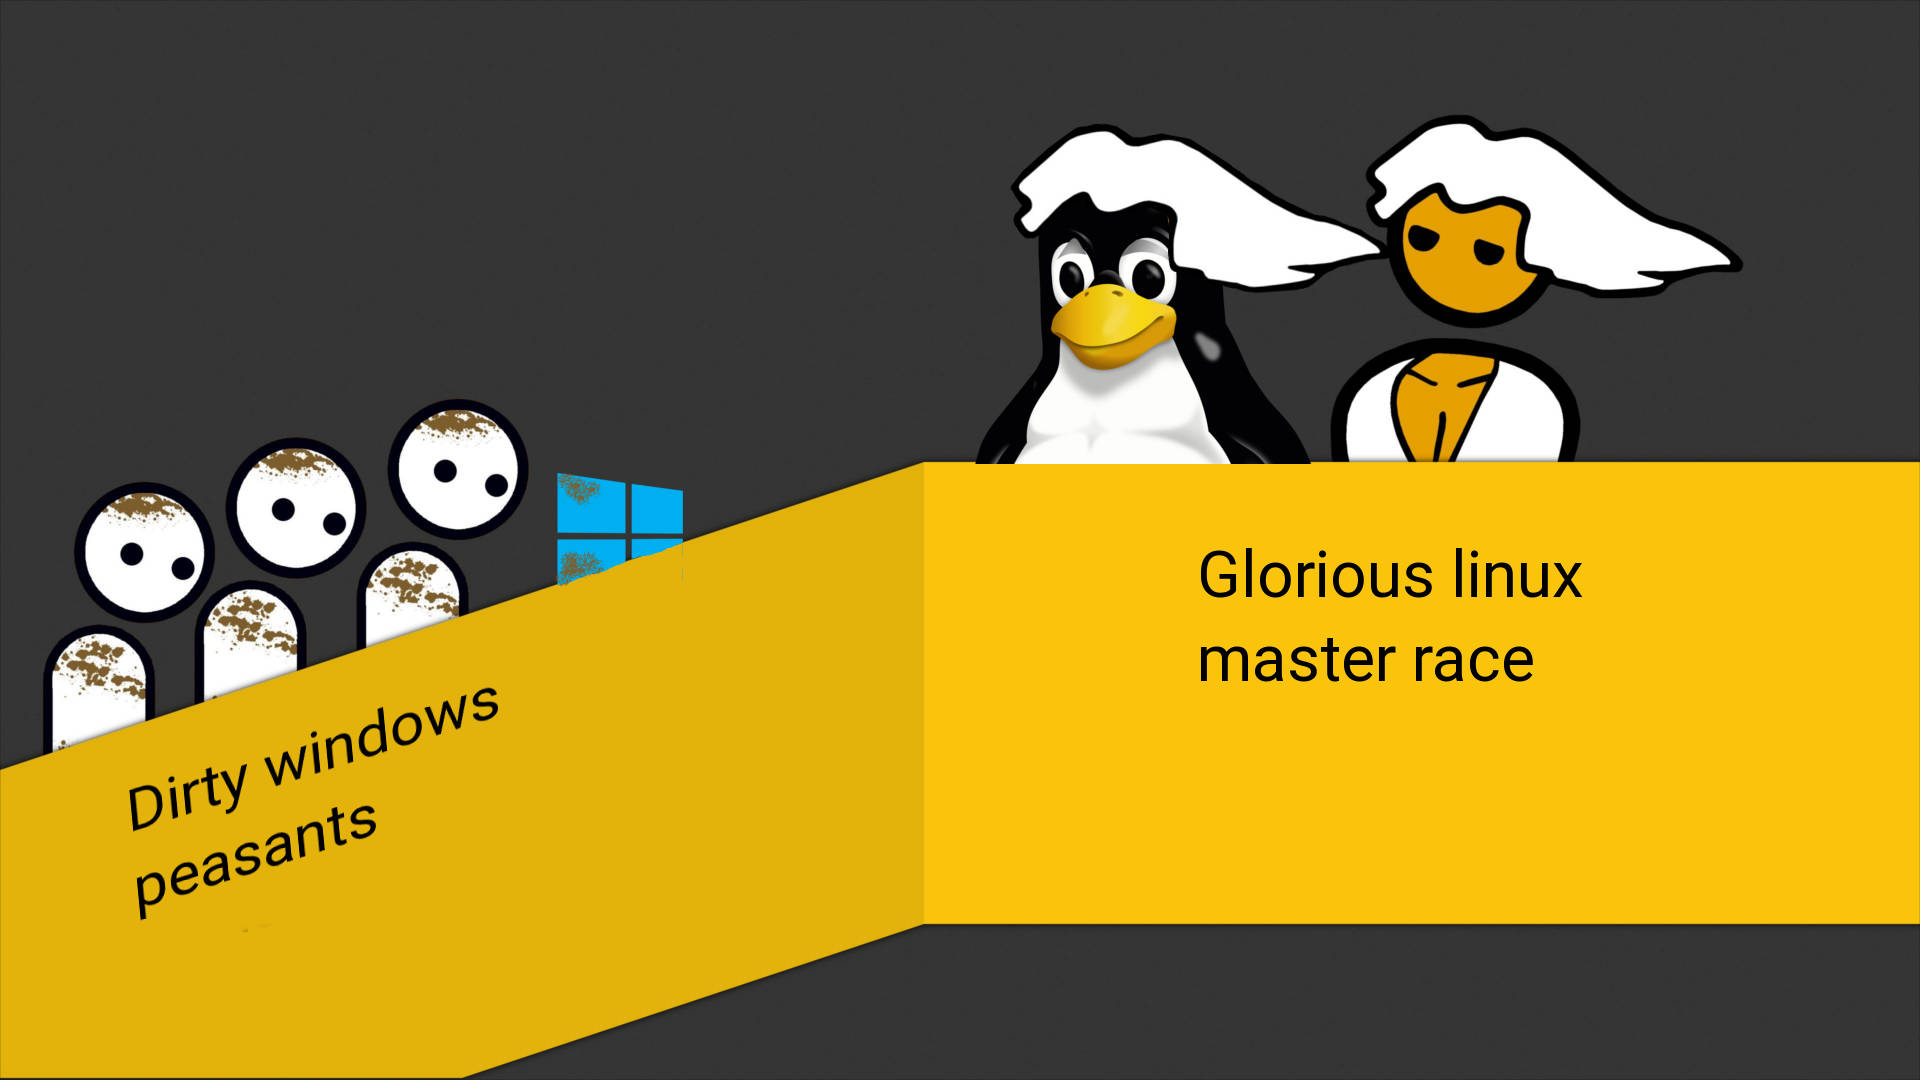 Linux Os Master Race Funny Wallpaper